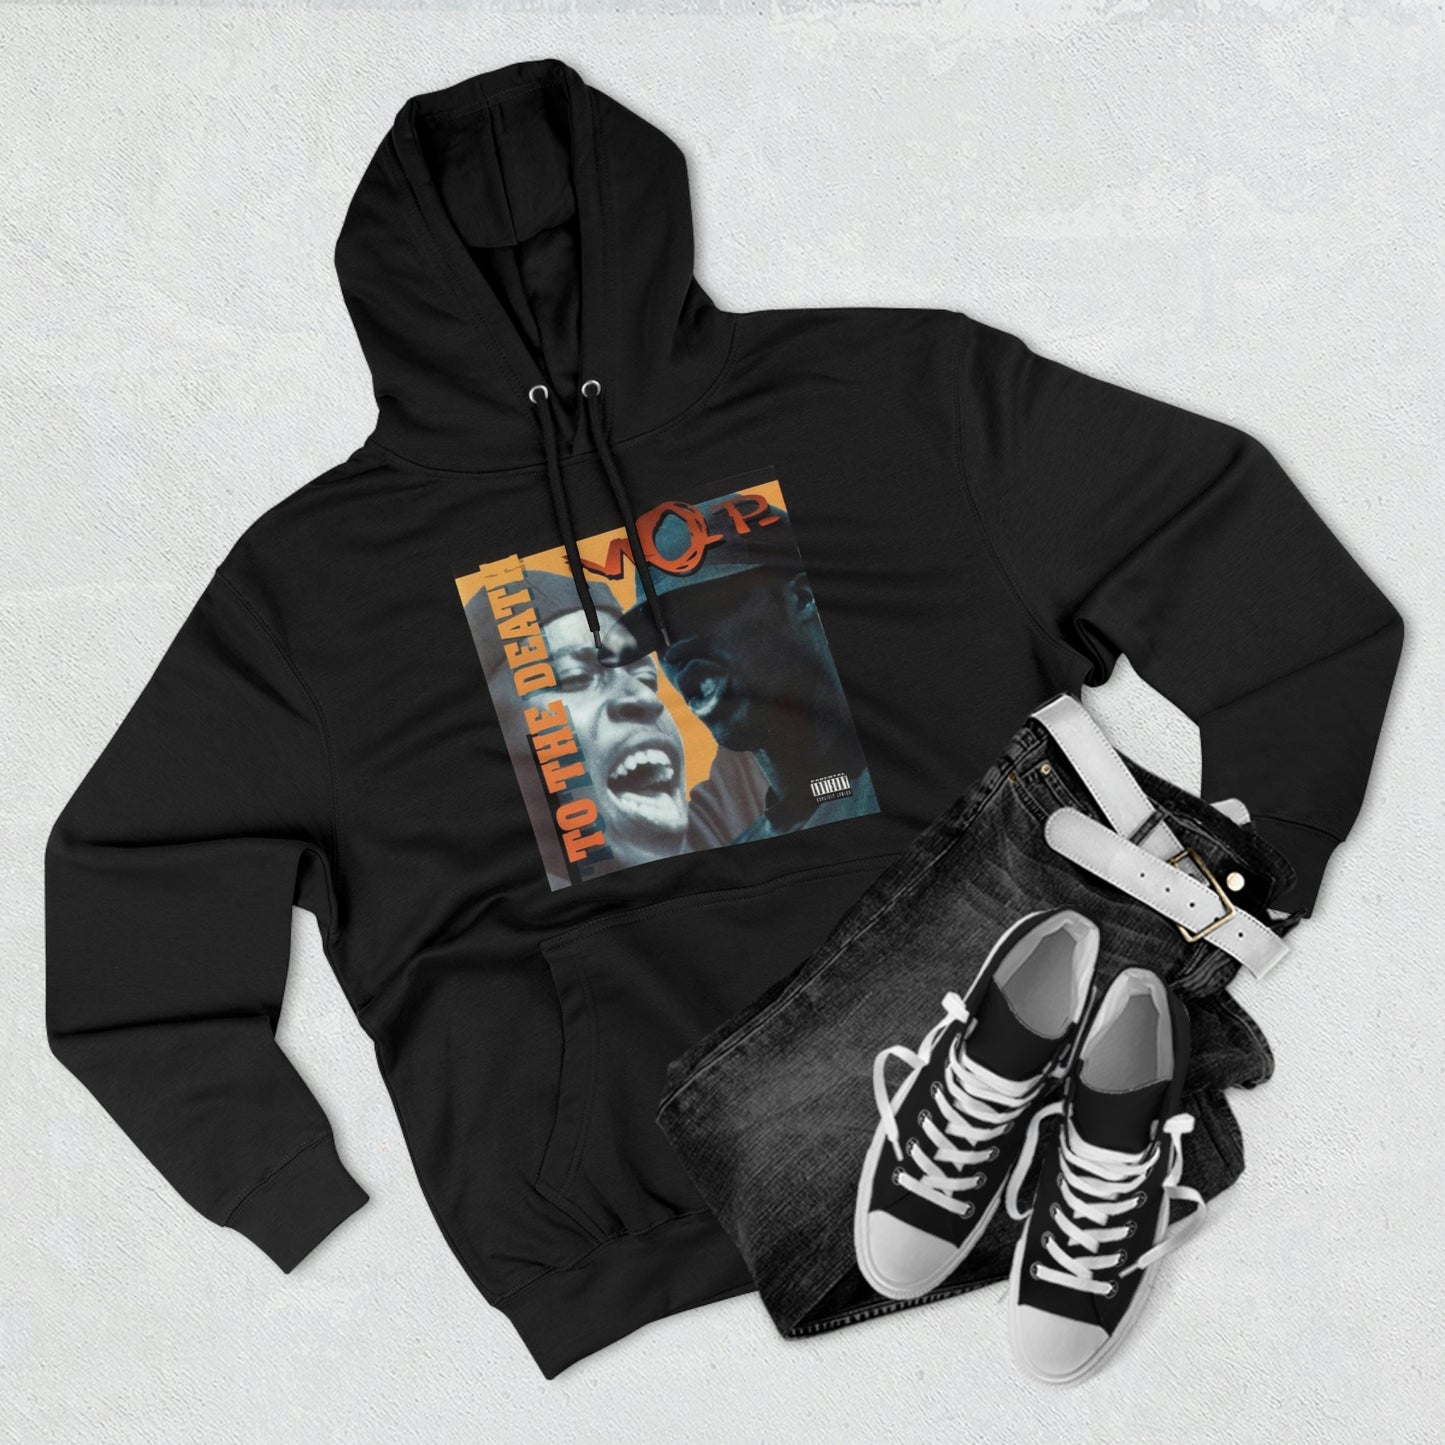 M.O.P - To The Death 29th Anniversary Hoodie